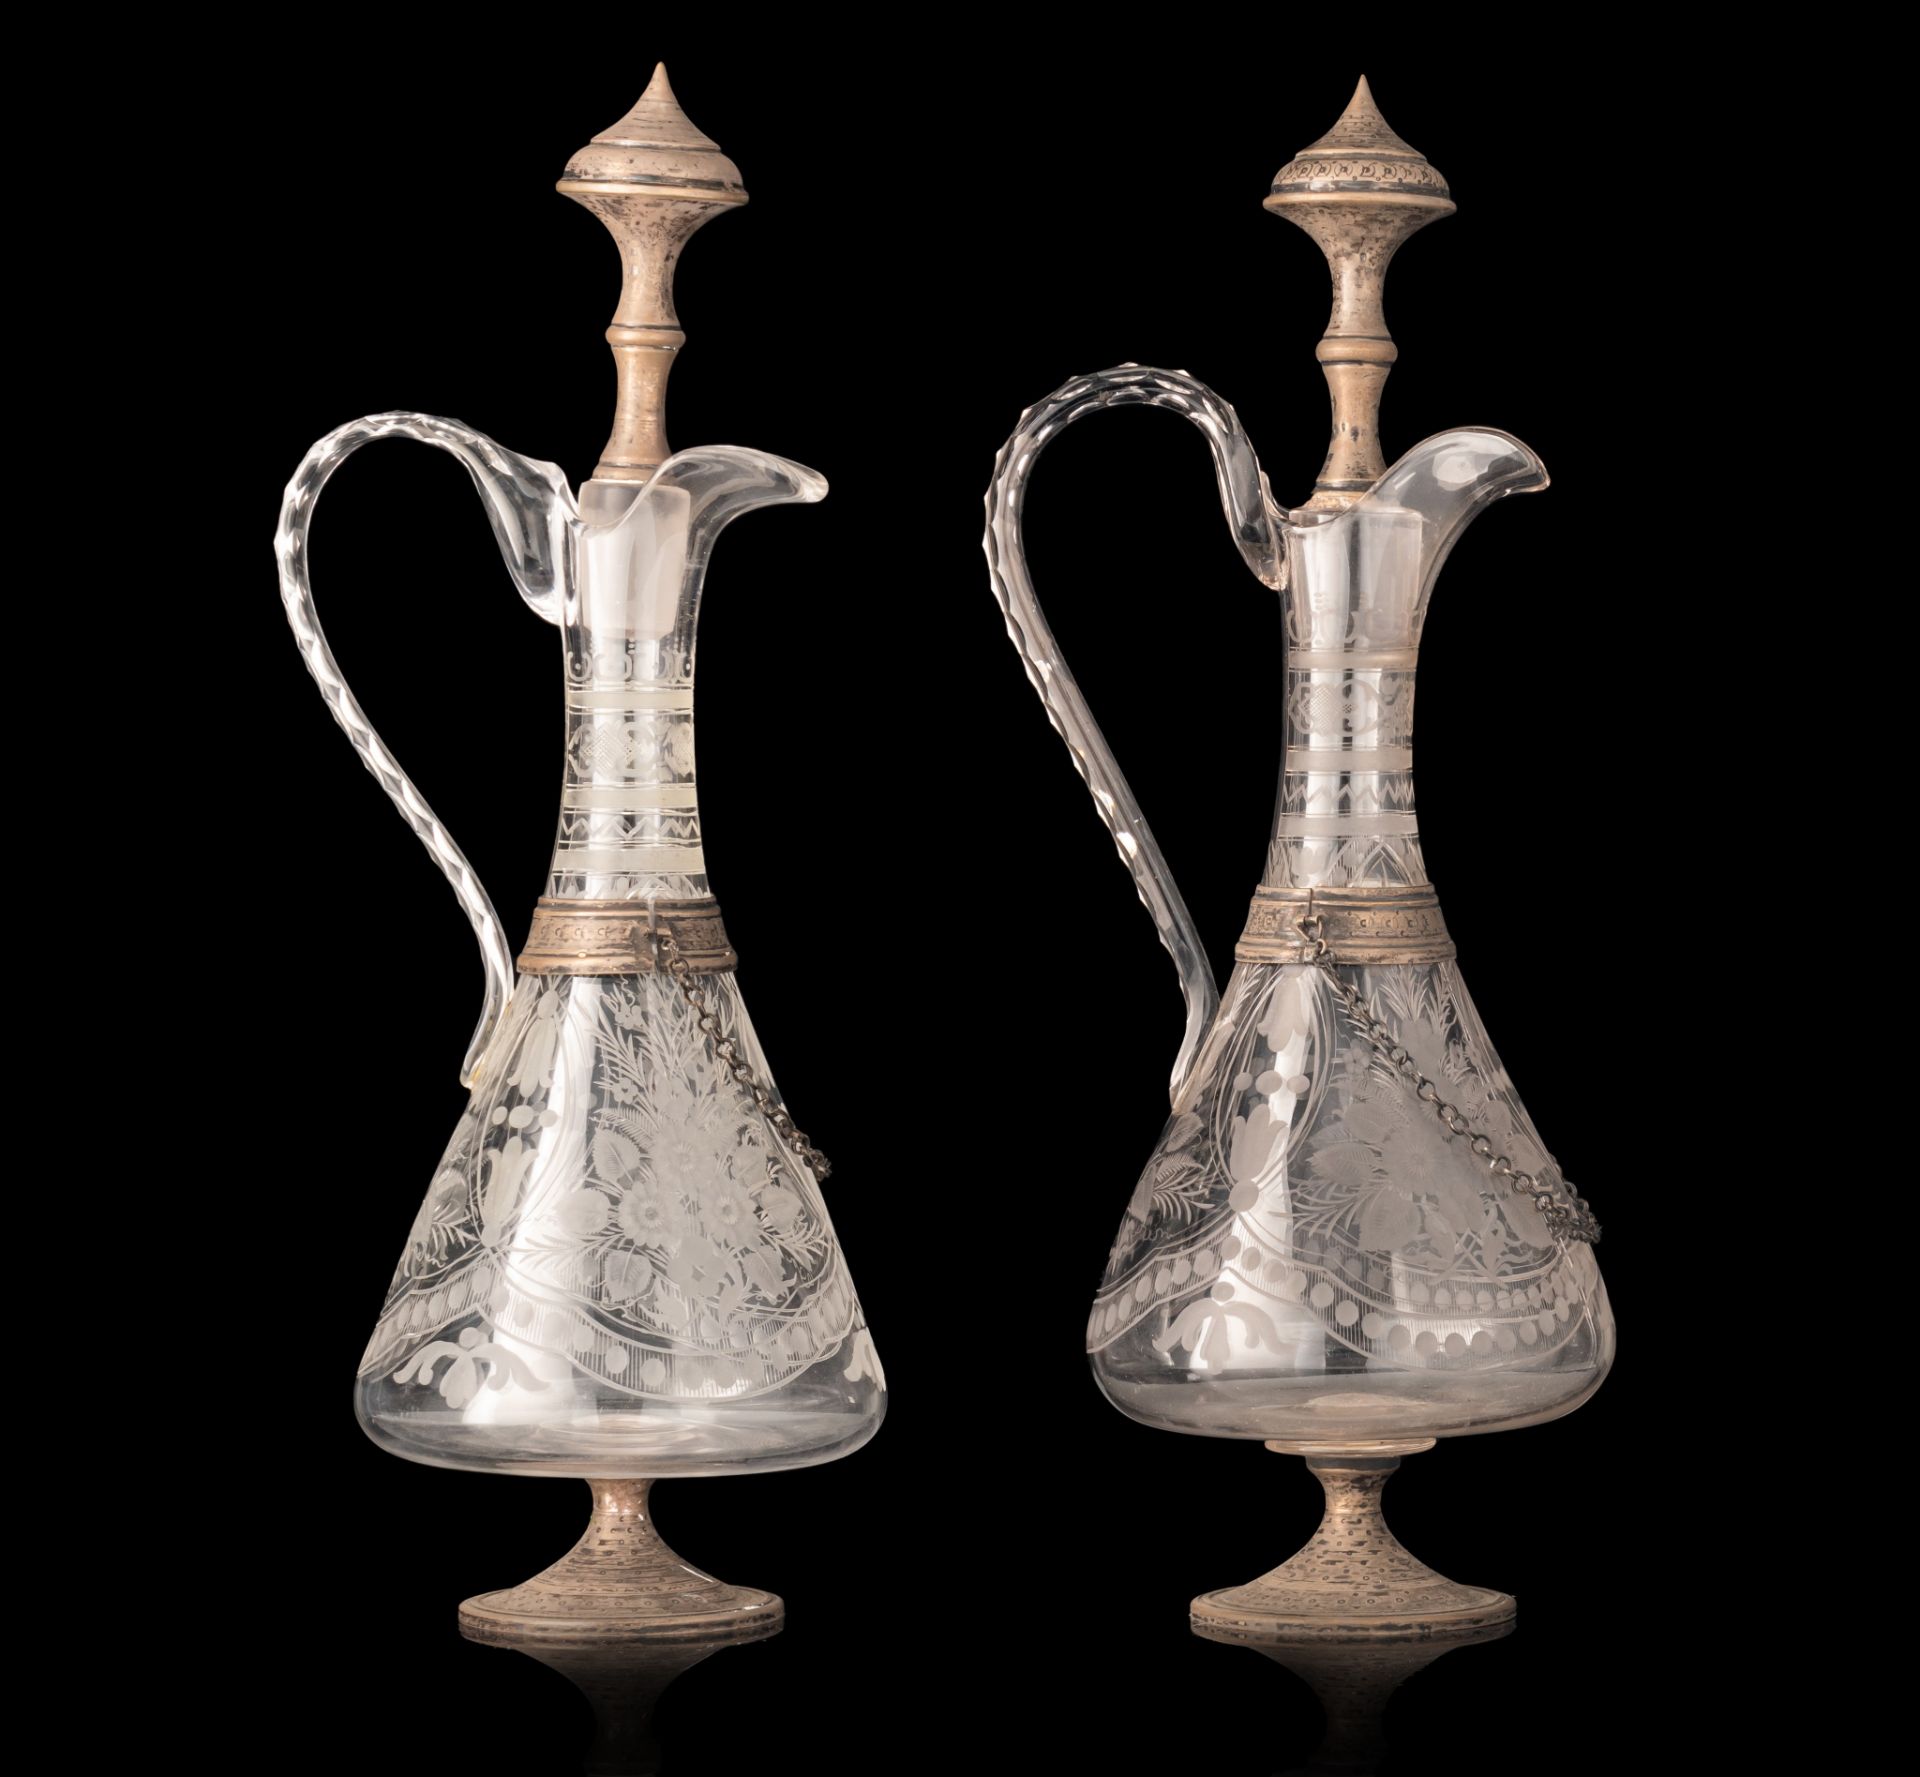 A pair of glass, silver-plated brass mounted decanters, H 41 - 42 cm